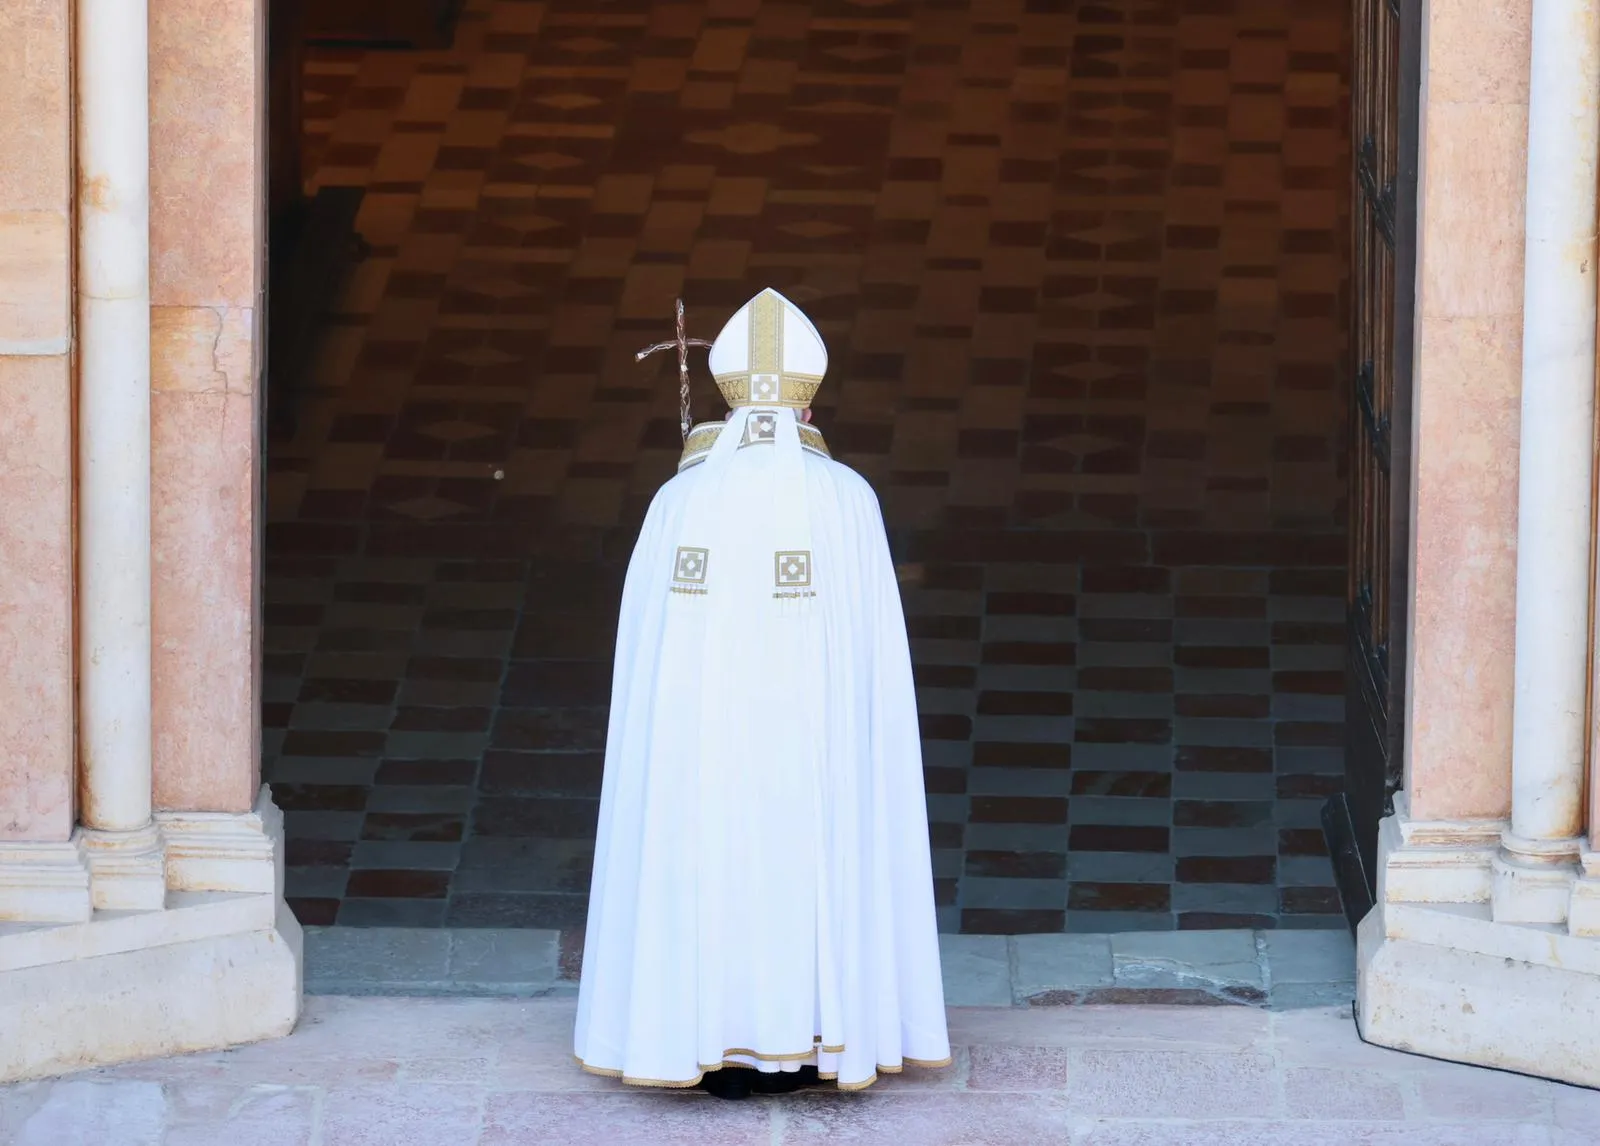 Pope Francis opens the Holy Door in L'Aquila, Italy on Aug. 28, 2022.?w=200&h=150